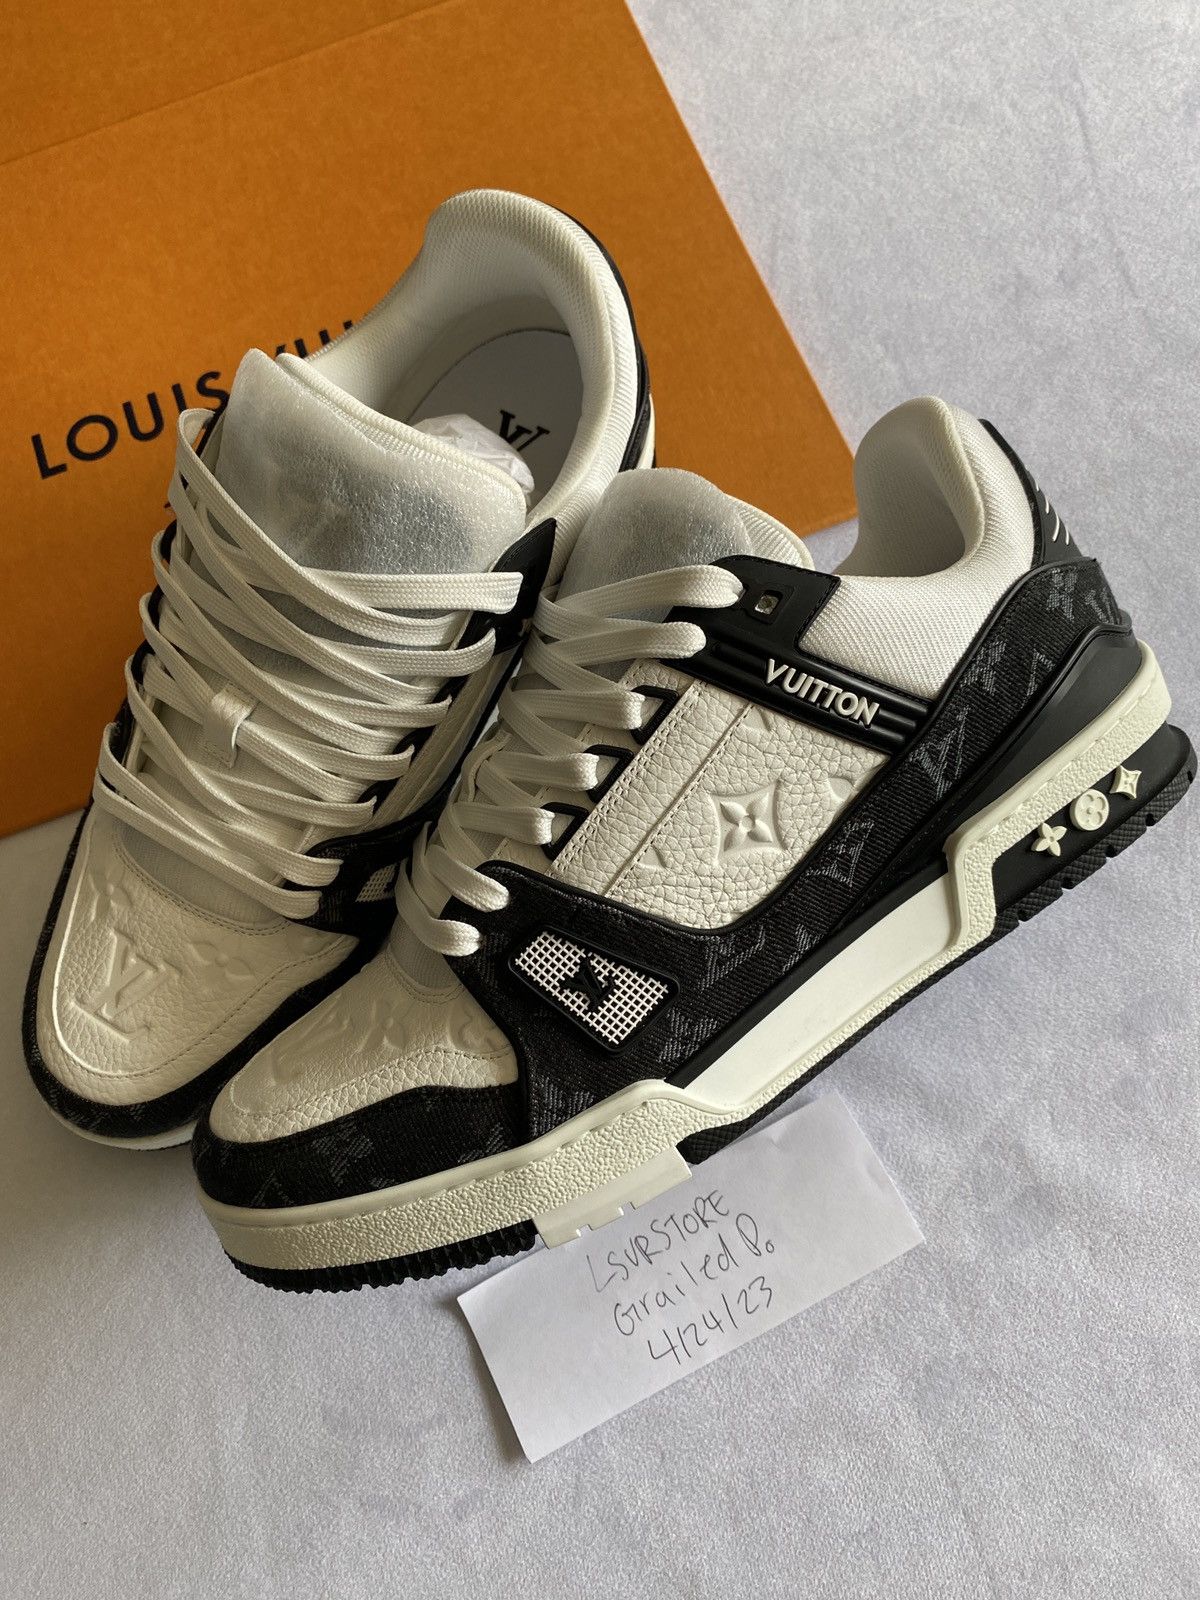 Louis vuitton Trainers LV Trainer white SS21 size 7 40 Eu for Sale in